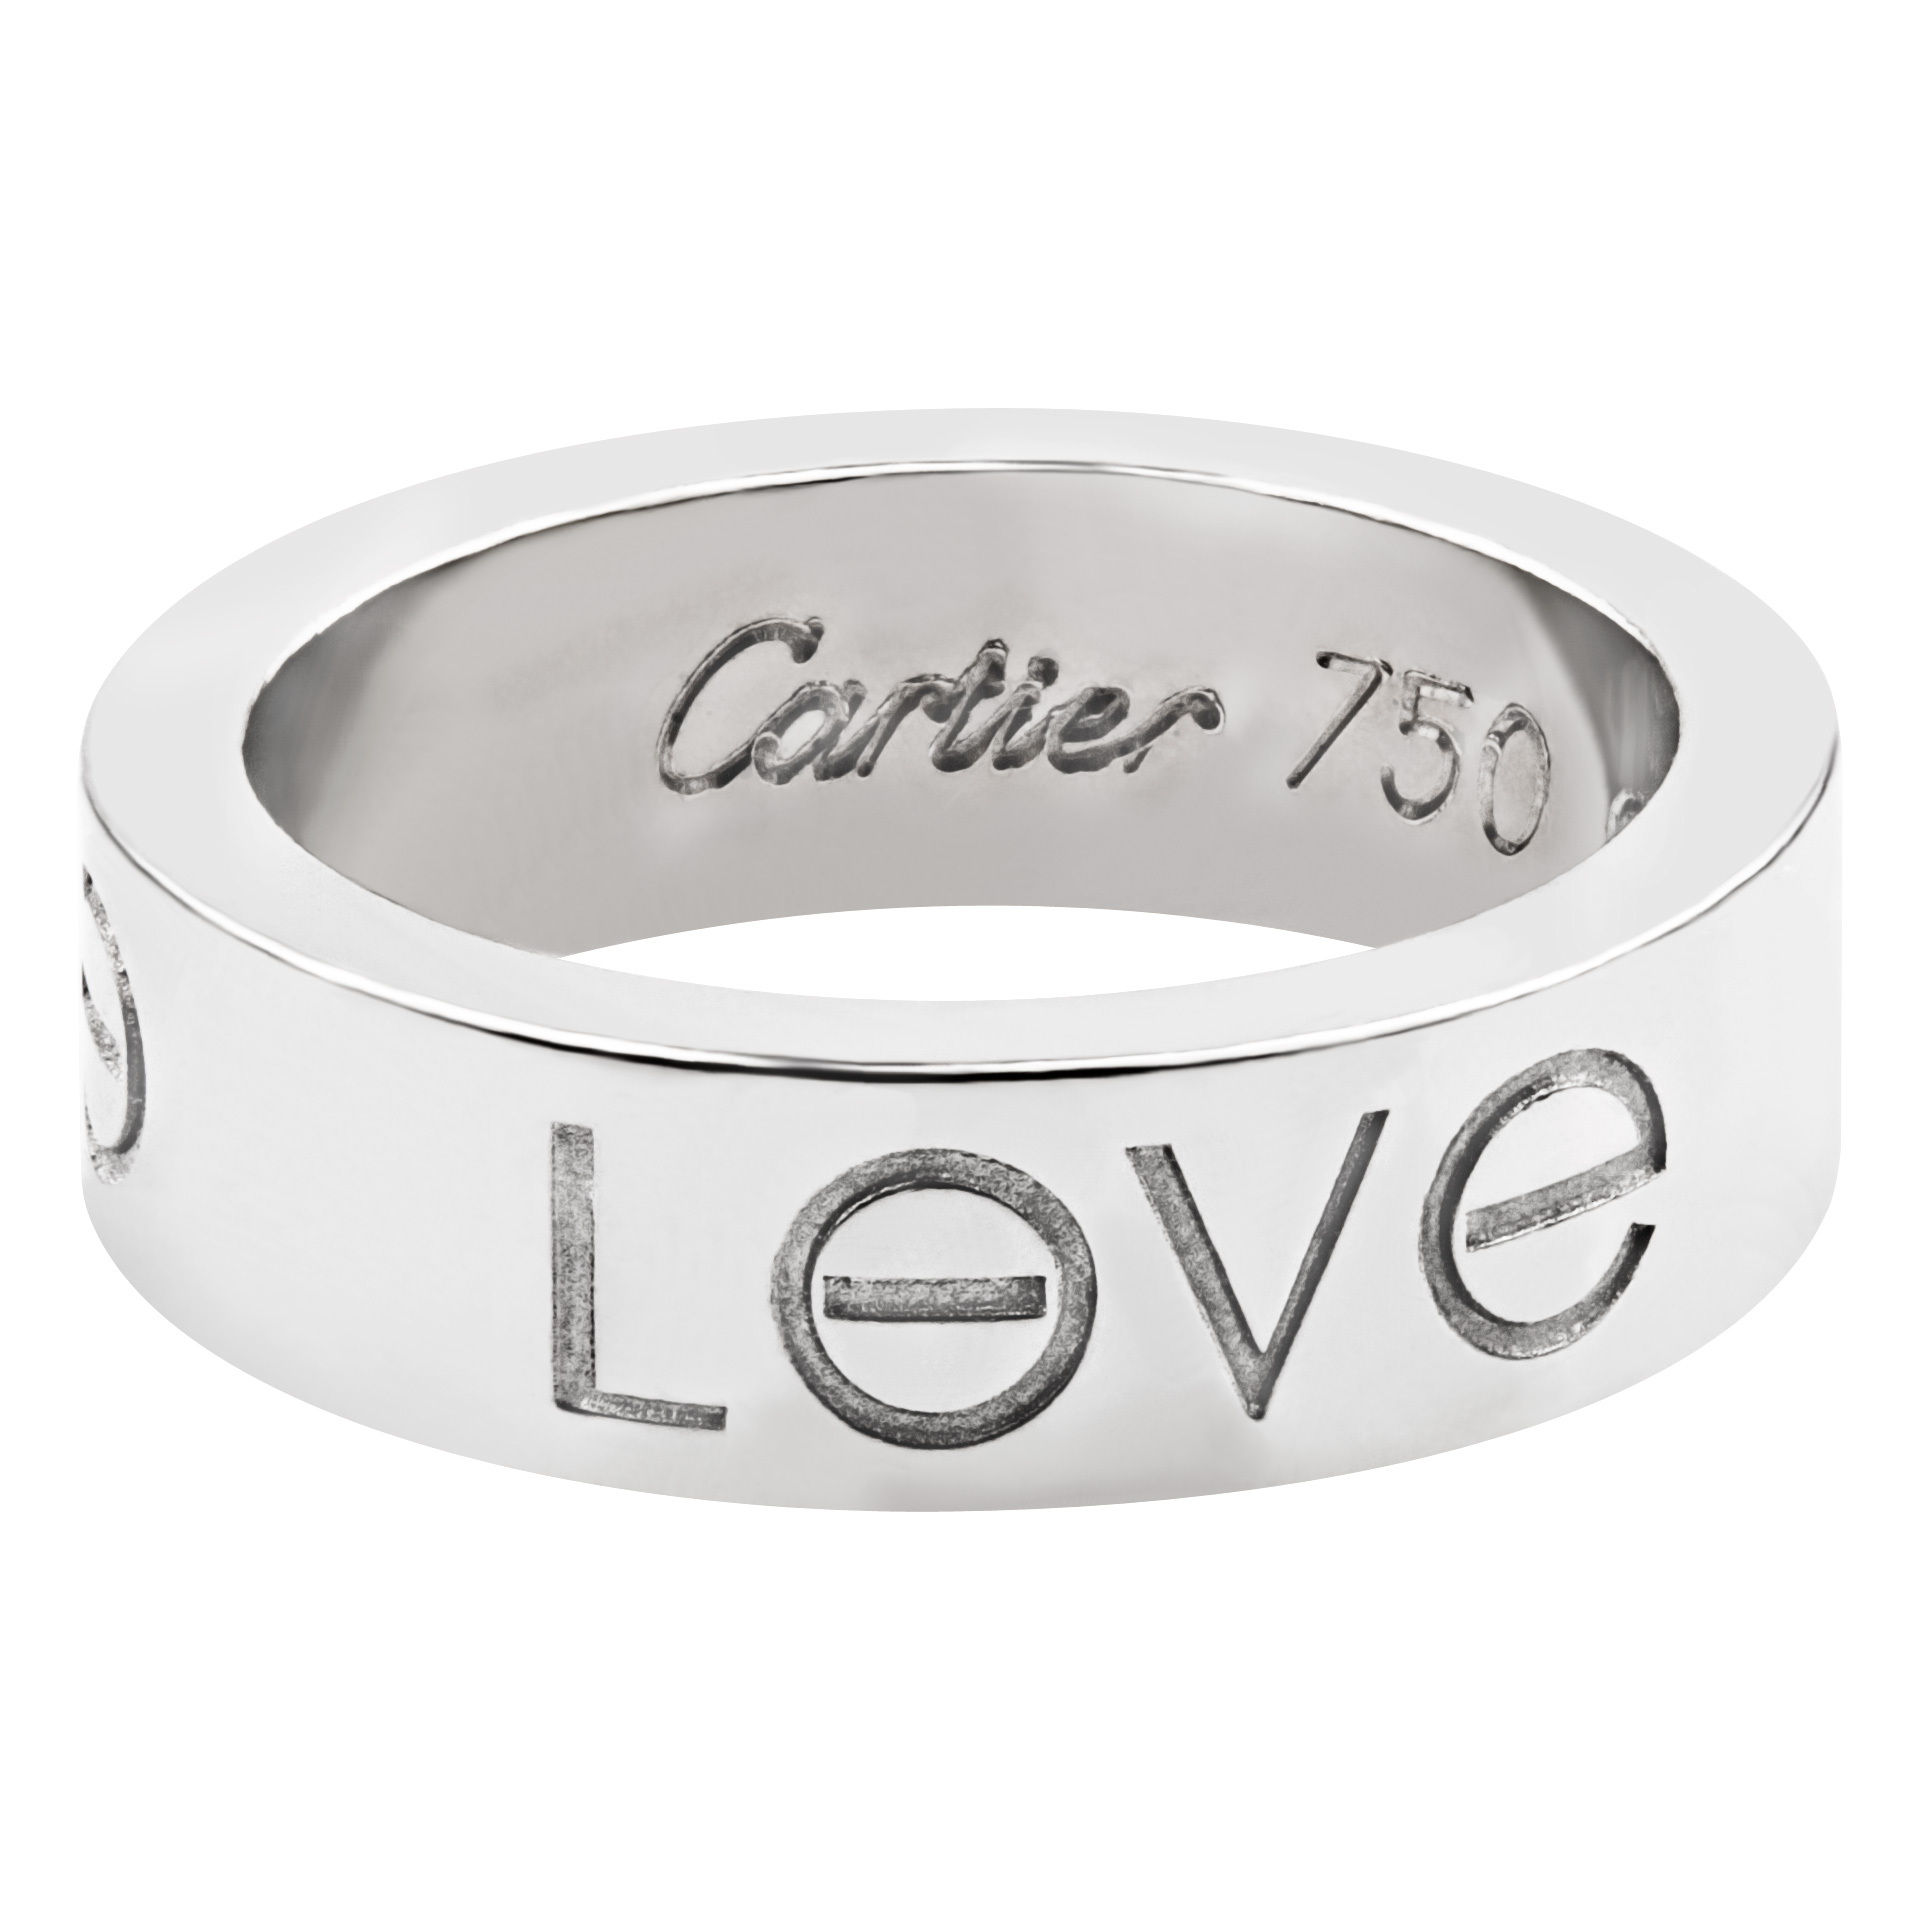 Cartier Love Charm 18k White Gold image 1